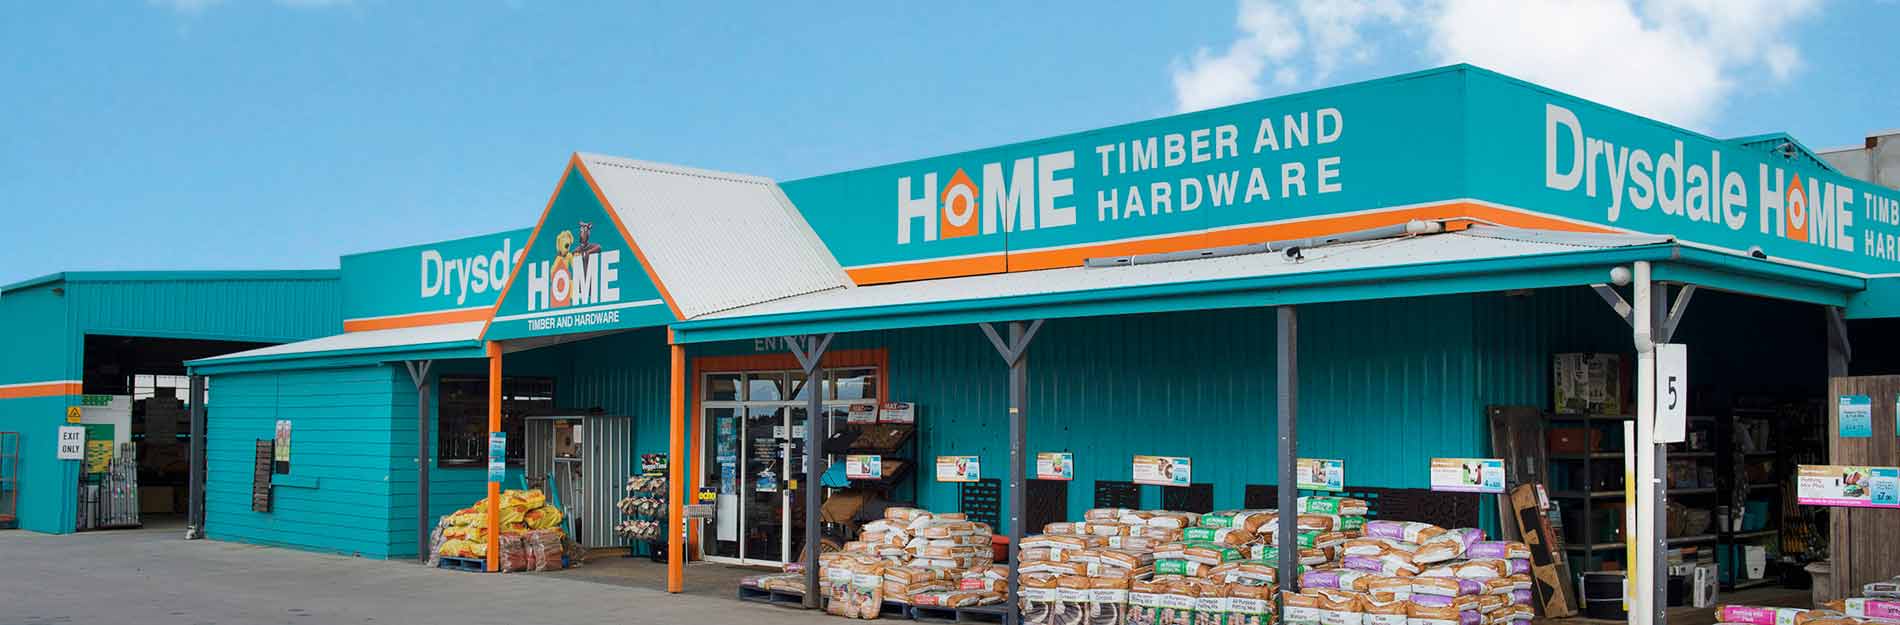 Drysdale Home Timber & Hardware